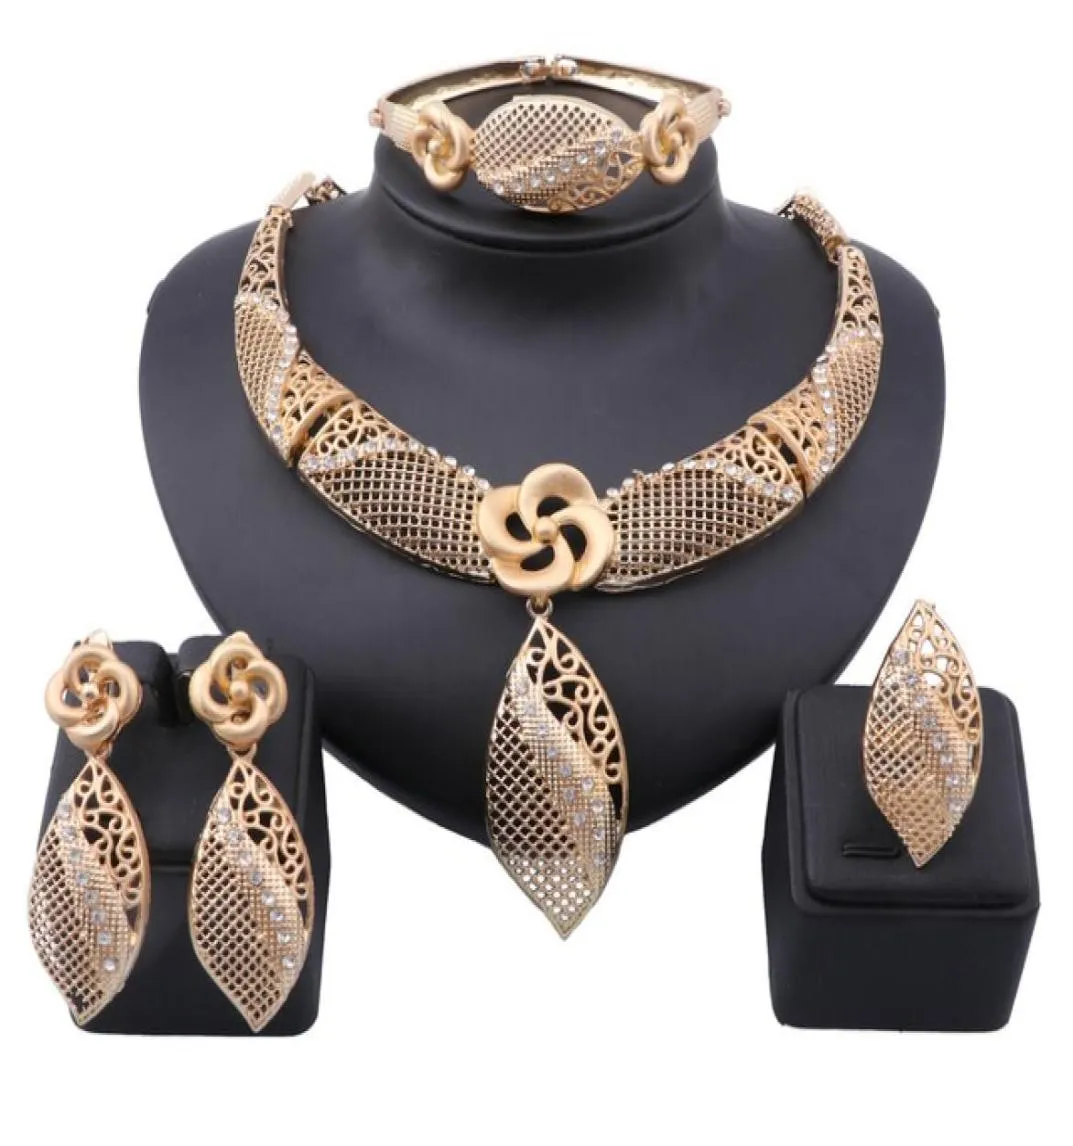 Trendy Nigerian African Beads Jewelry Sets Crystal Necklace Earrings Bangle Ring Party Wedding Dubai Jewellry Set6493007